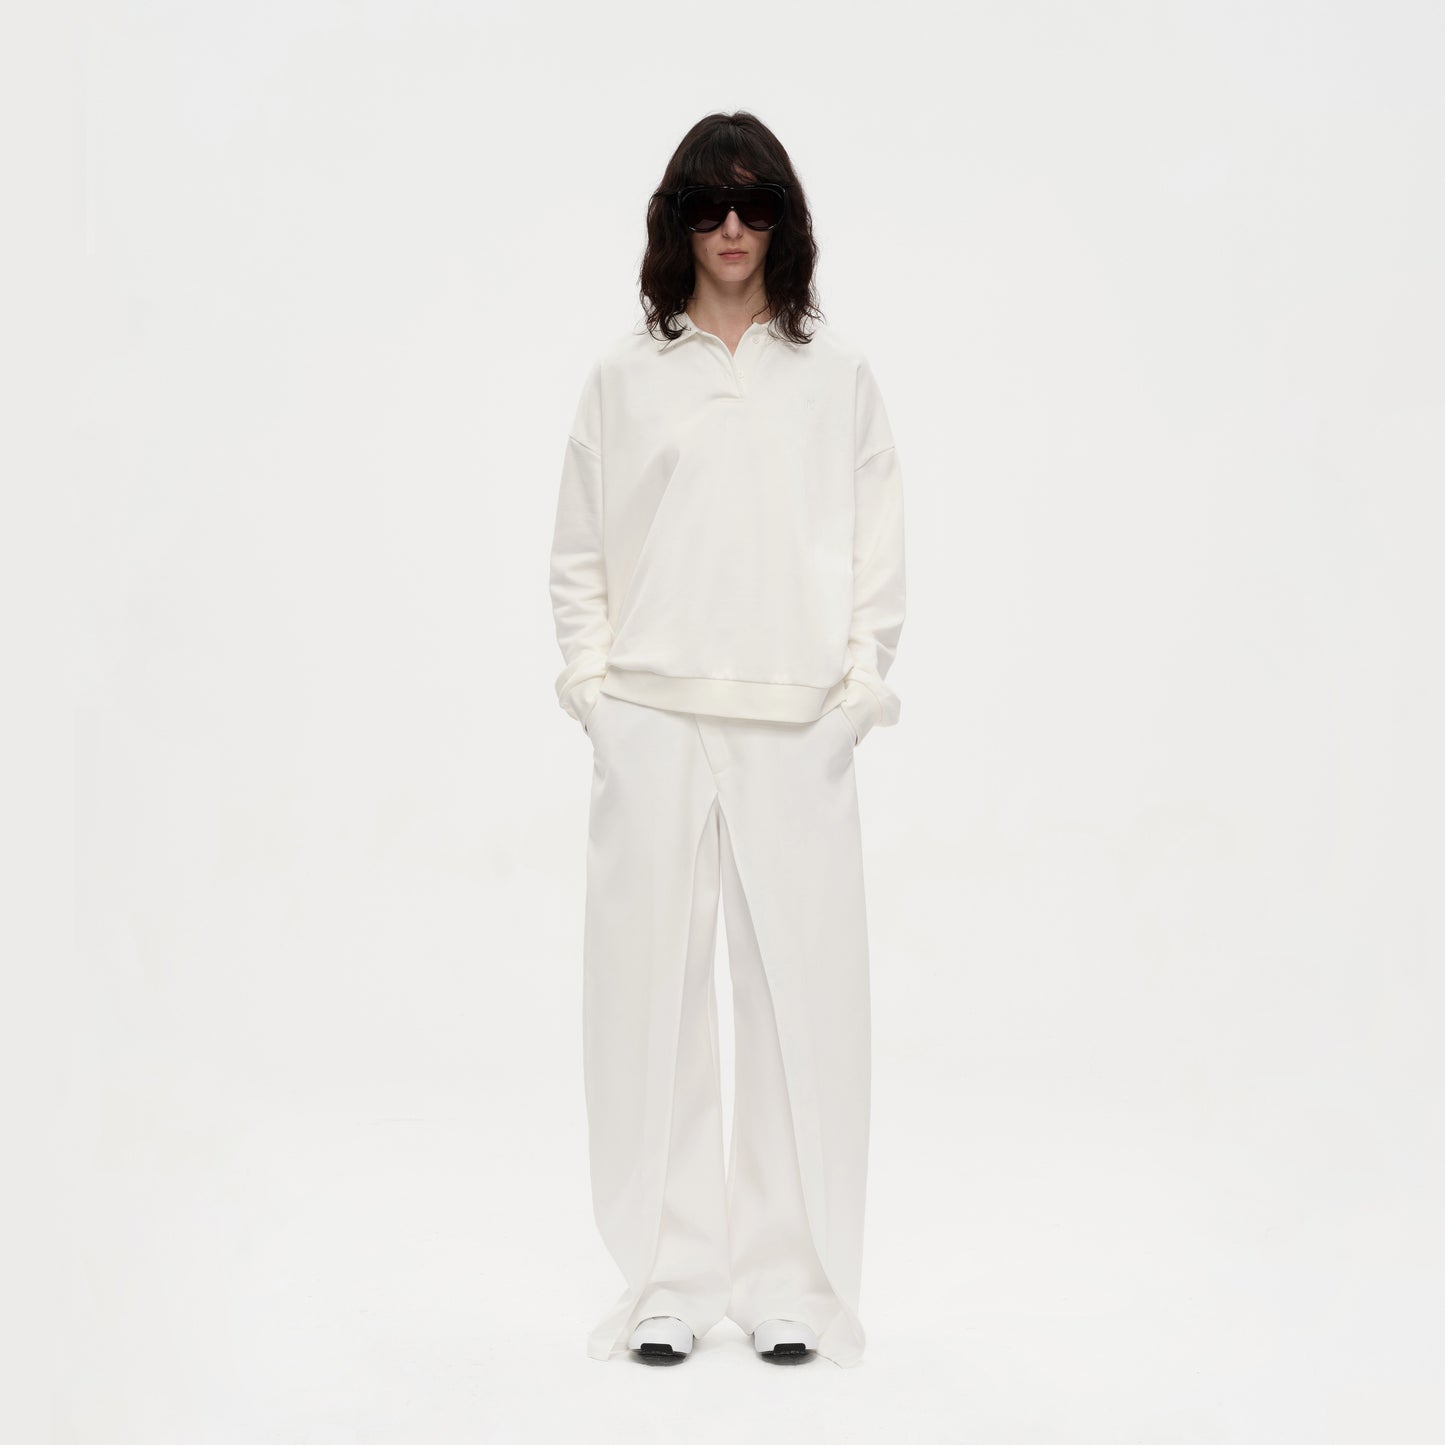 The Double Panels Curved-cut Trousers